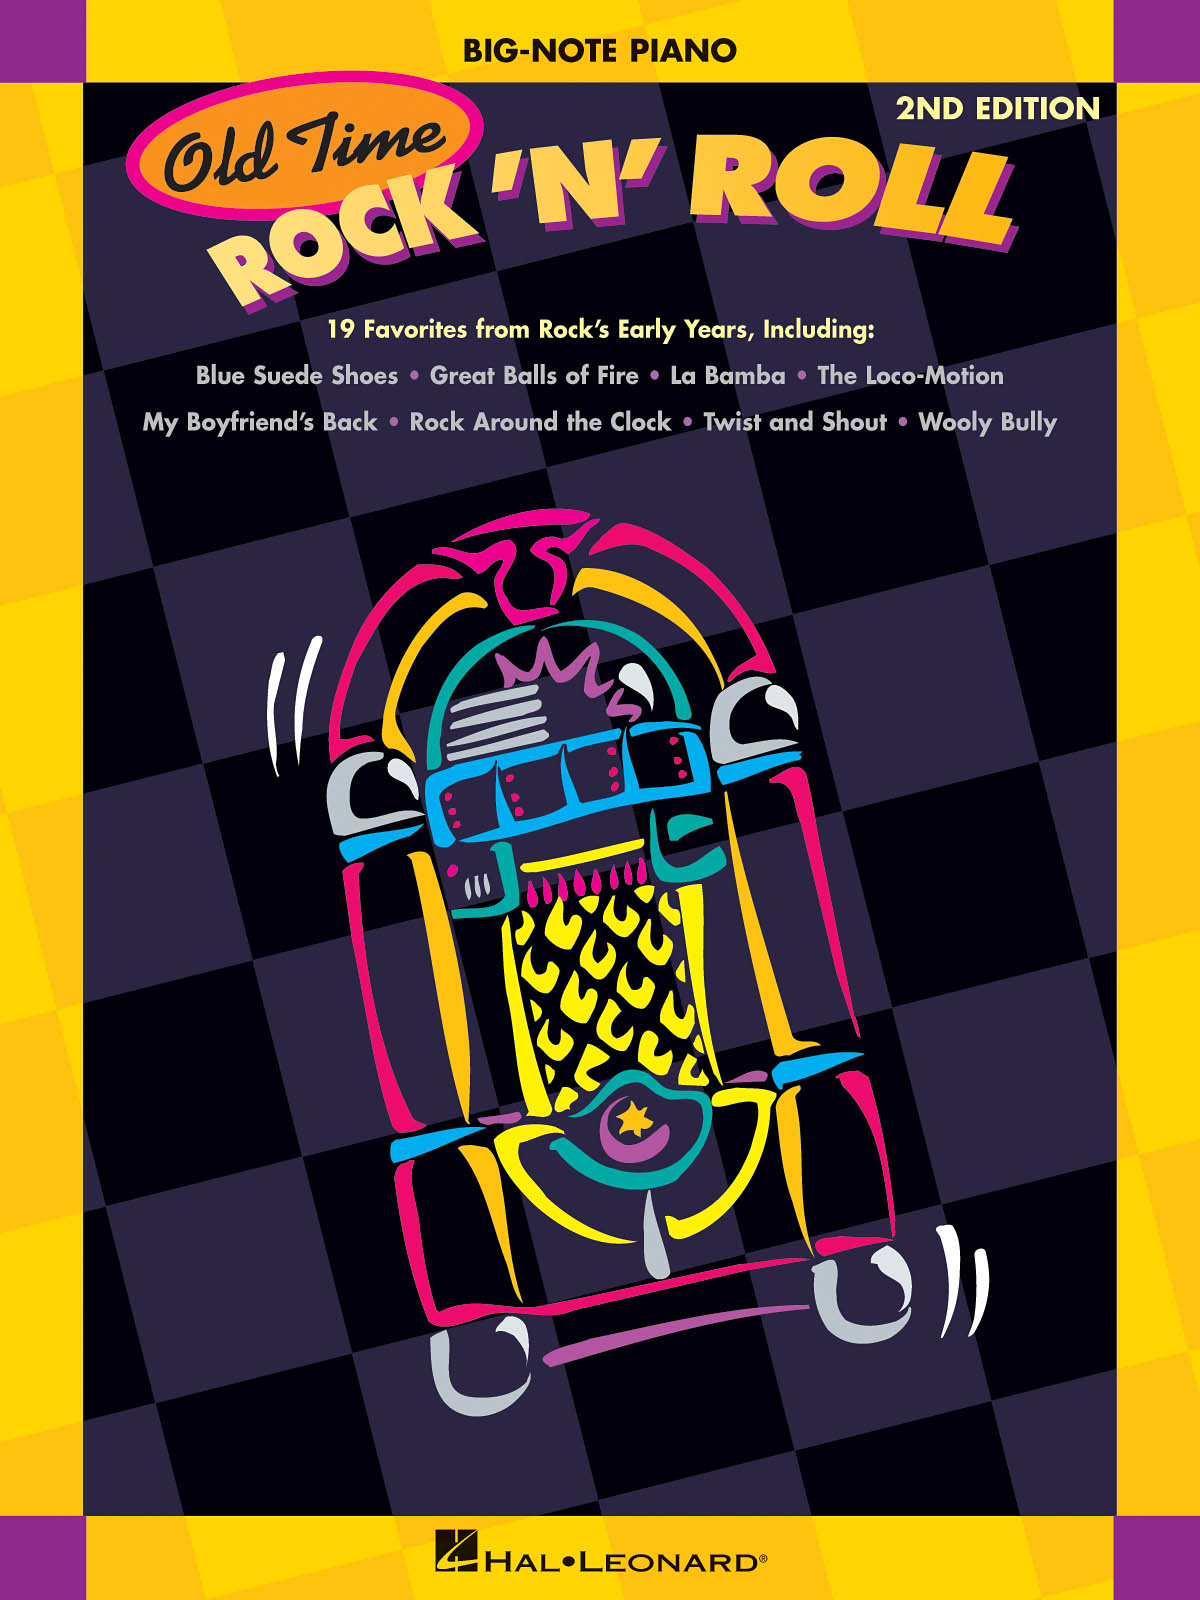 Old Time Rock ‘N’ Roll – 2nd Edition